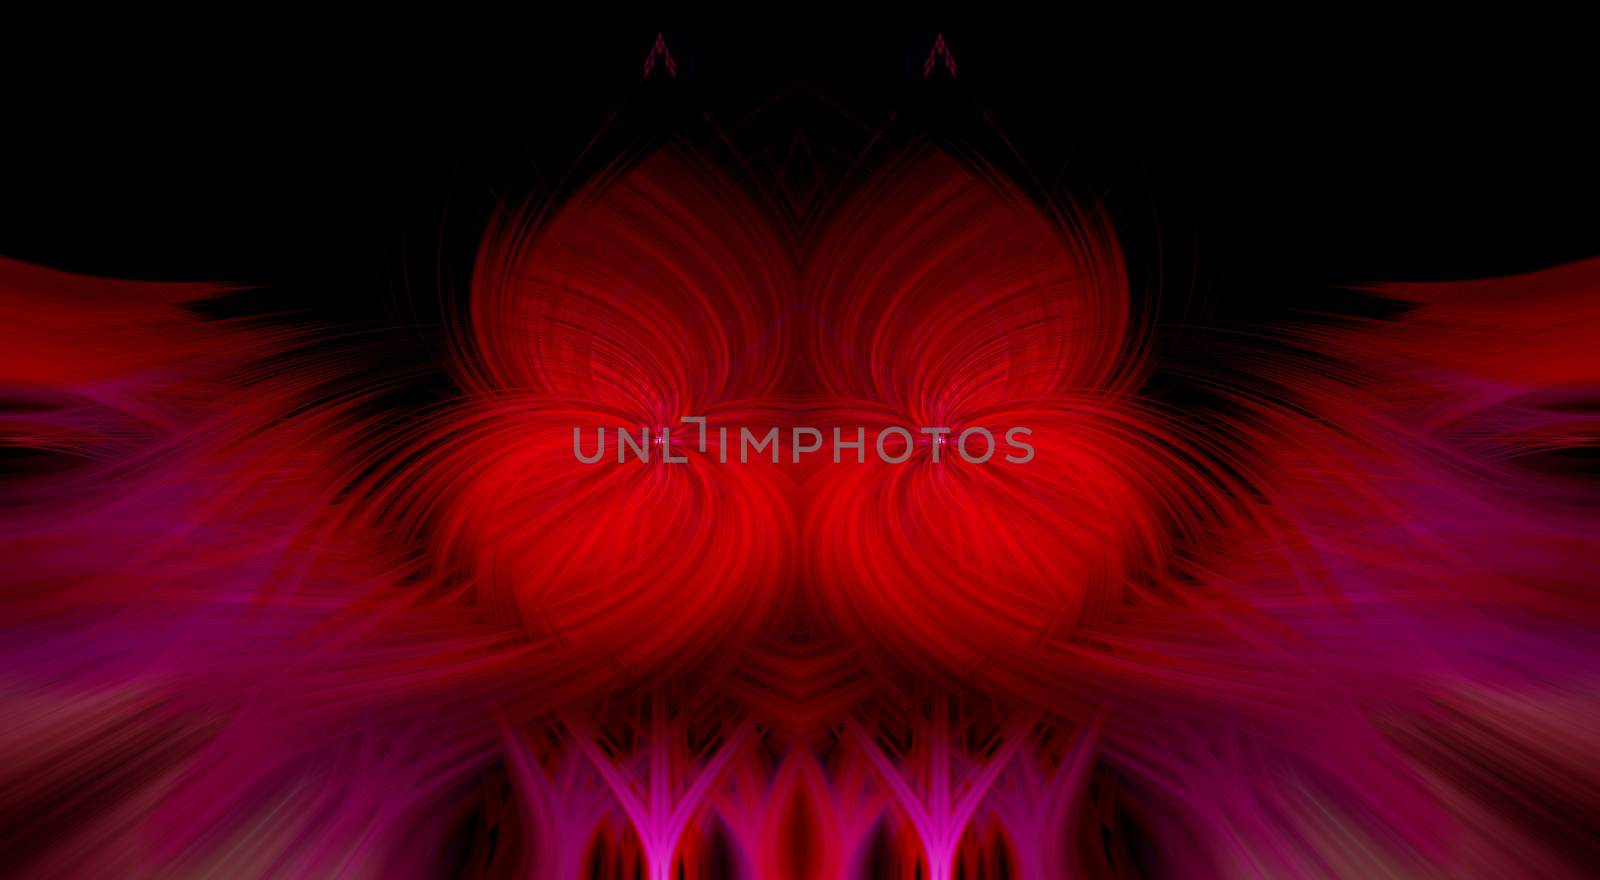 Beautiful abstract intertwined 3d fibers forming an ornament out of various symmetrical shapes. Purple and red colors. Black background. Illustration.